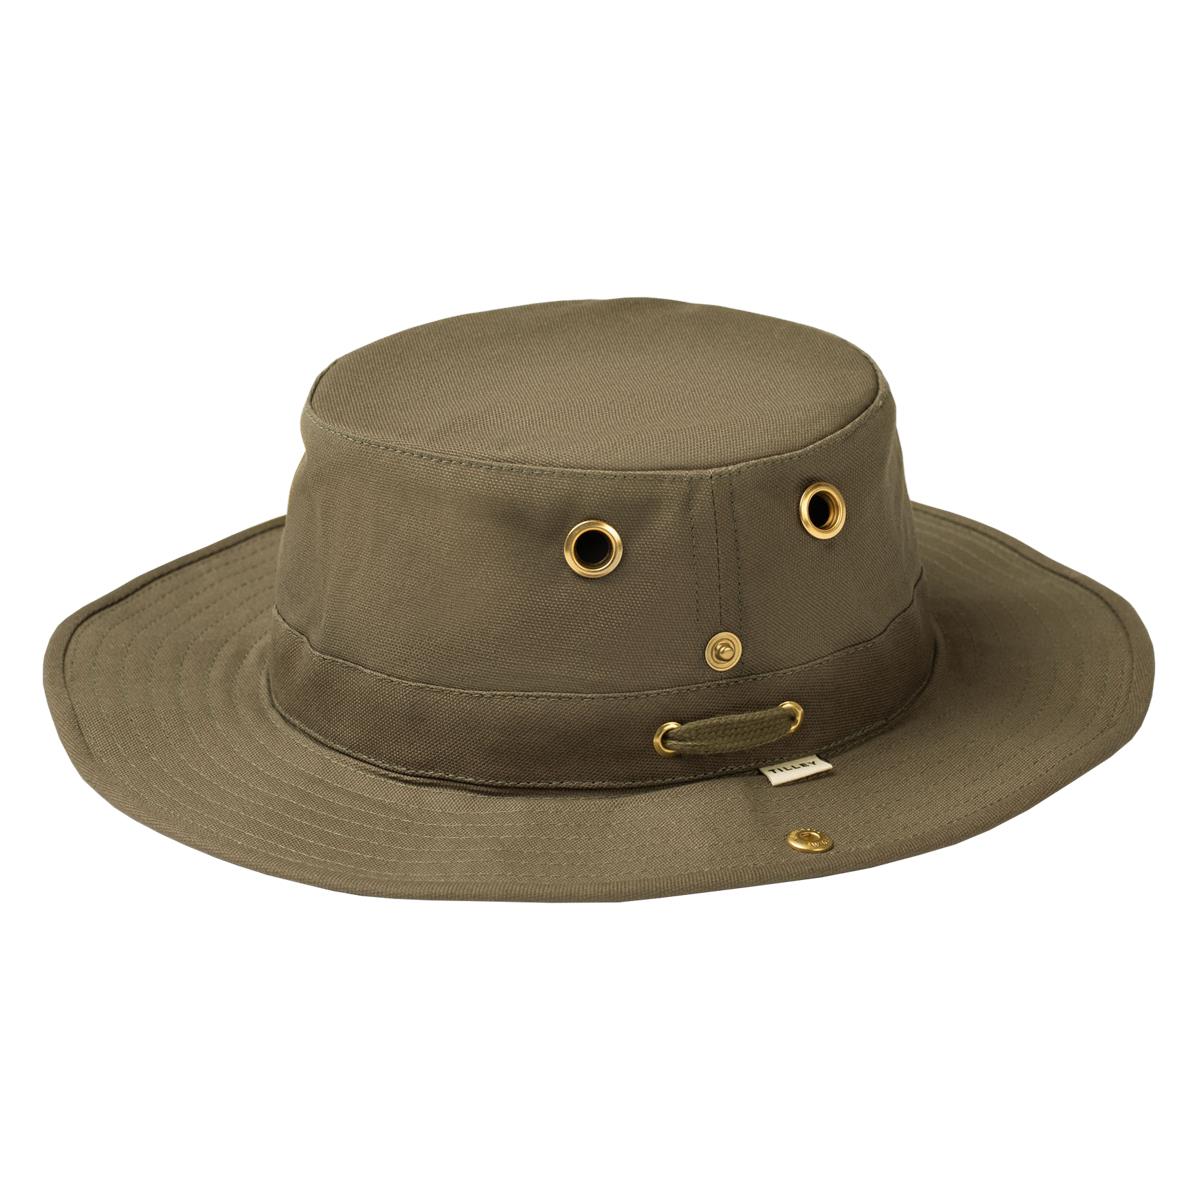 How is the Tilley hemp hat fastened securely on the head?